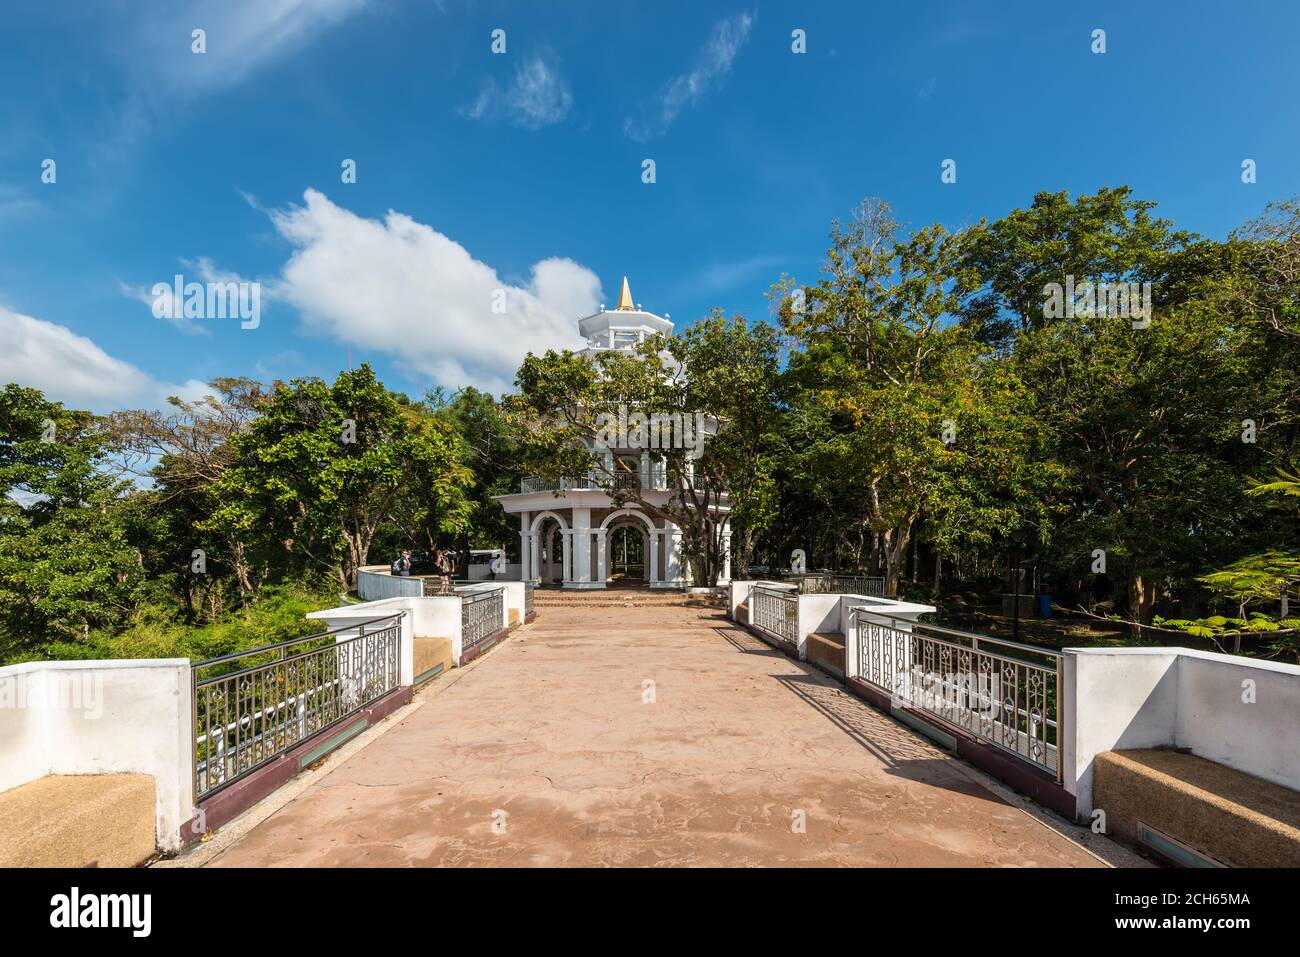 Phuket, Thailand - November 29, 2019: View of the Hall of Fame on hill top at Rang Hill view point in Phuket island, Southern of Thailand. Stock Photo